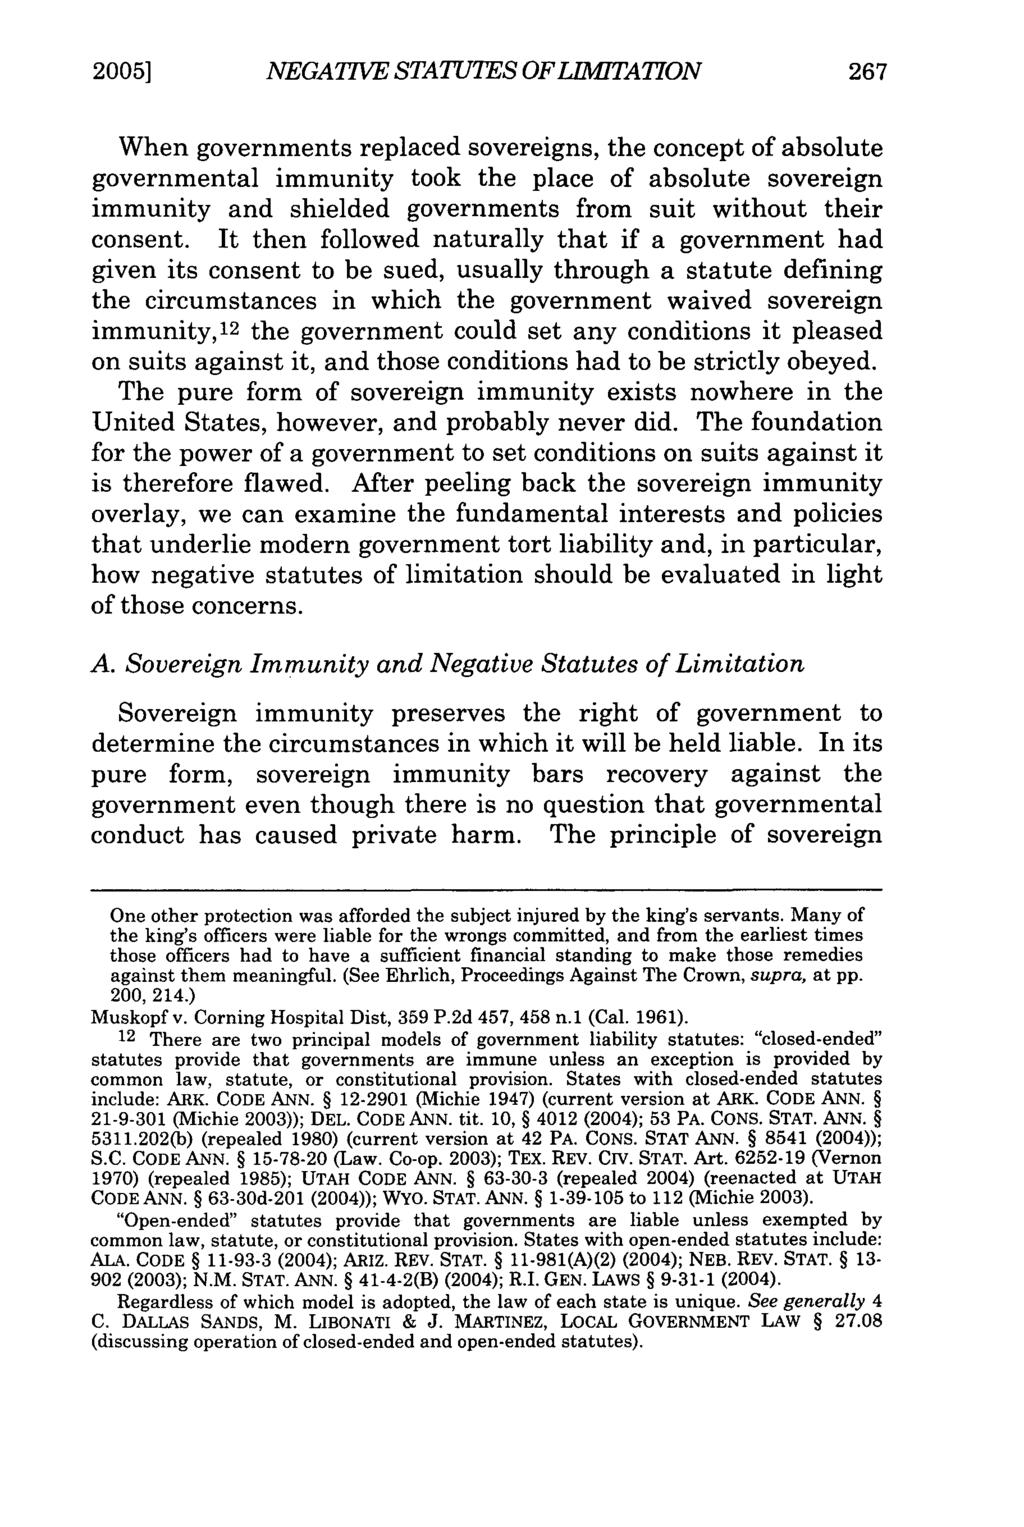 2005] NEGATIVE STATUTES OFLMITATION When governments replaced sovereigns, the concept of absolute governmental immunity took the place of absolute sovereign immunity and shielded governments from